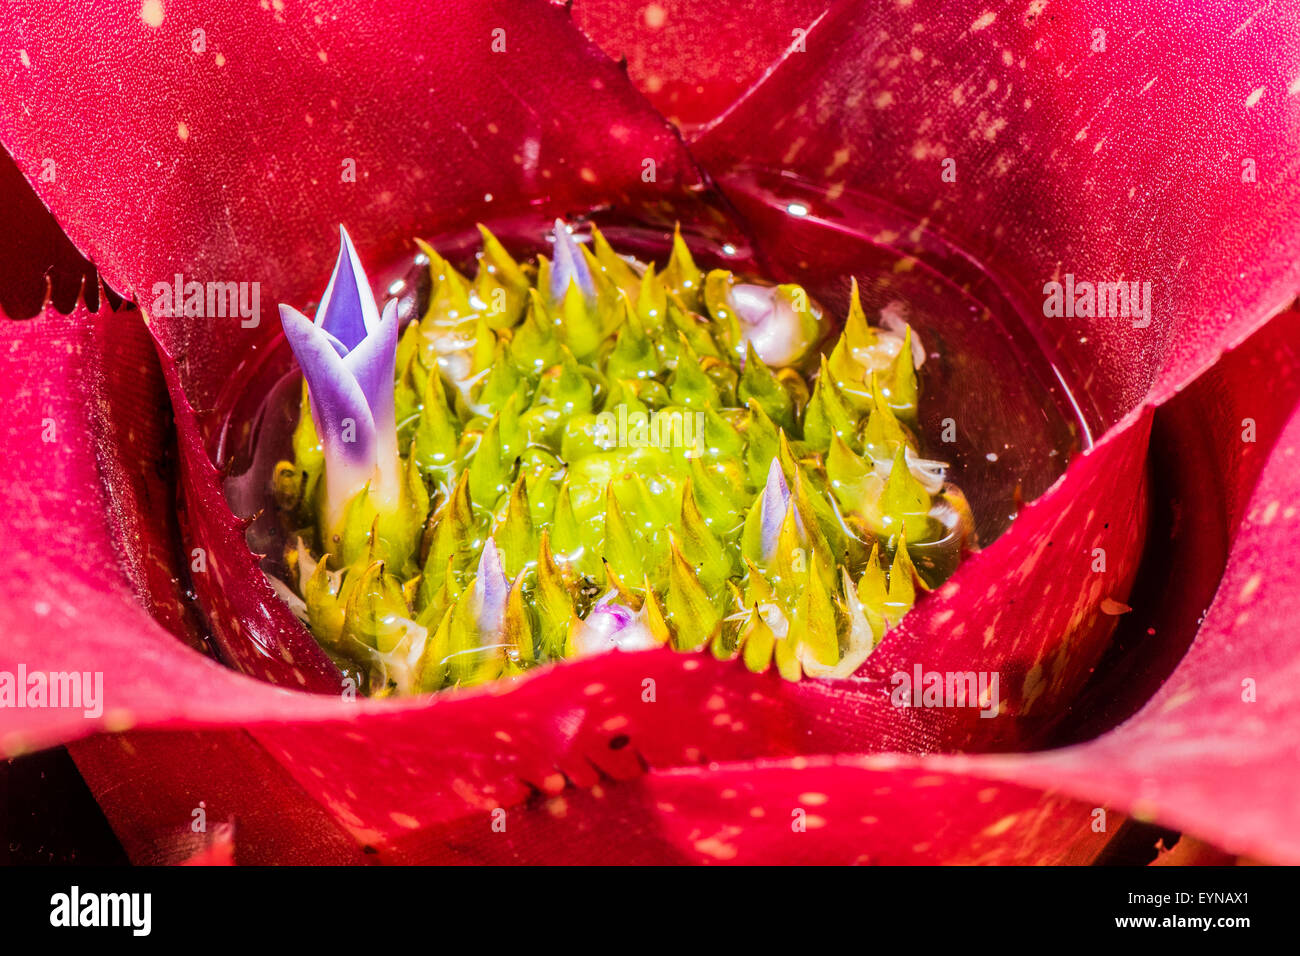 A Bromeliad in flower Stock Photo